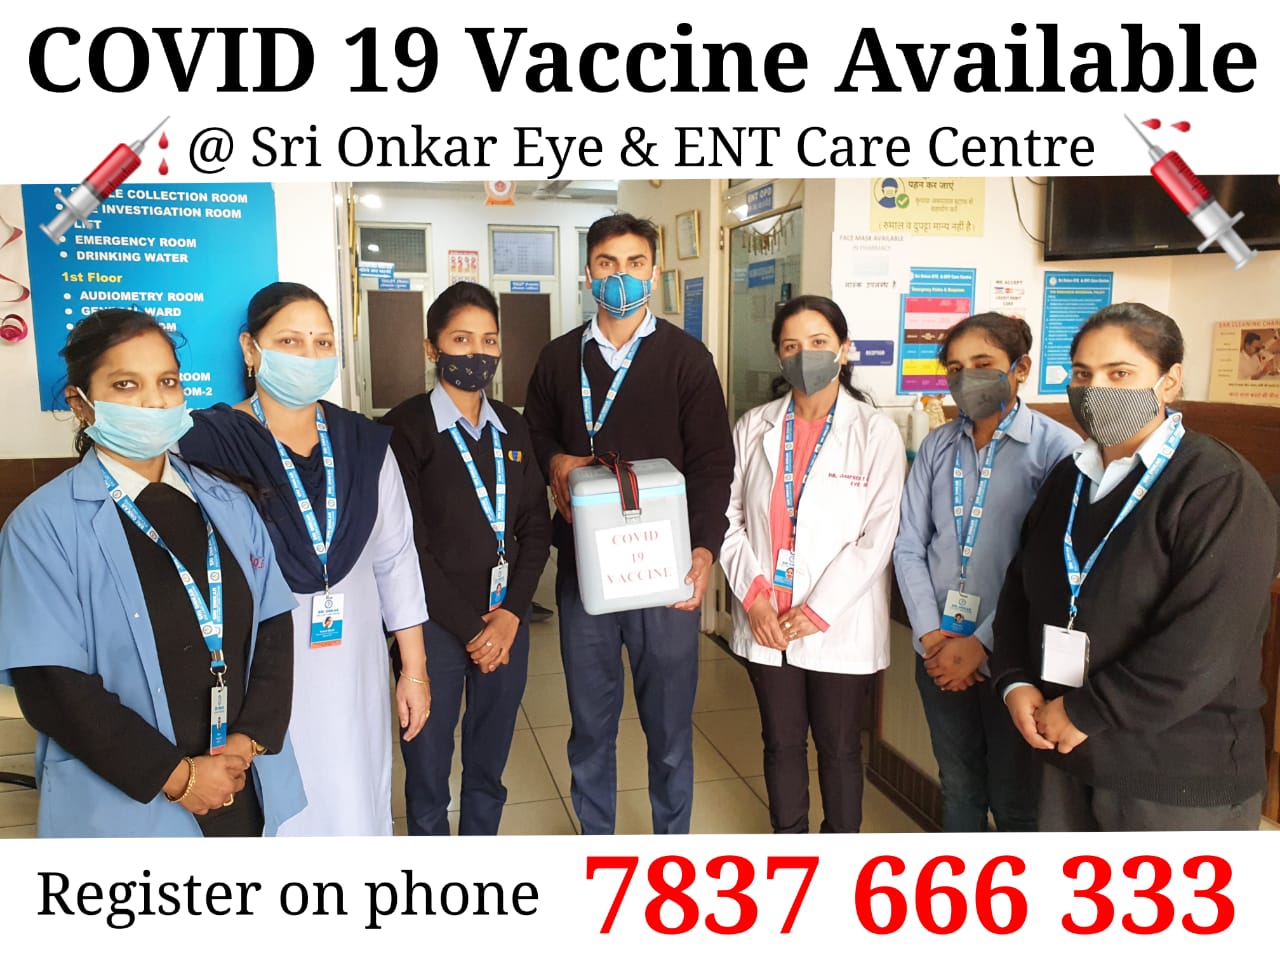 COVID-199 Vaccination Centre in Ambala | Authorized vaccination centre | Sri Onkar Eye & ENT Care Centre